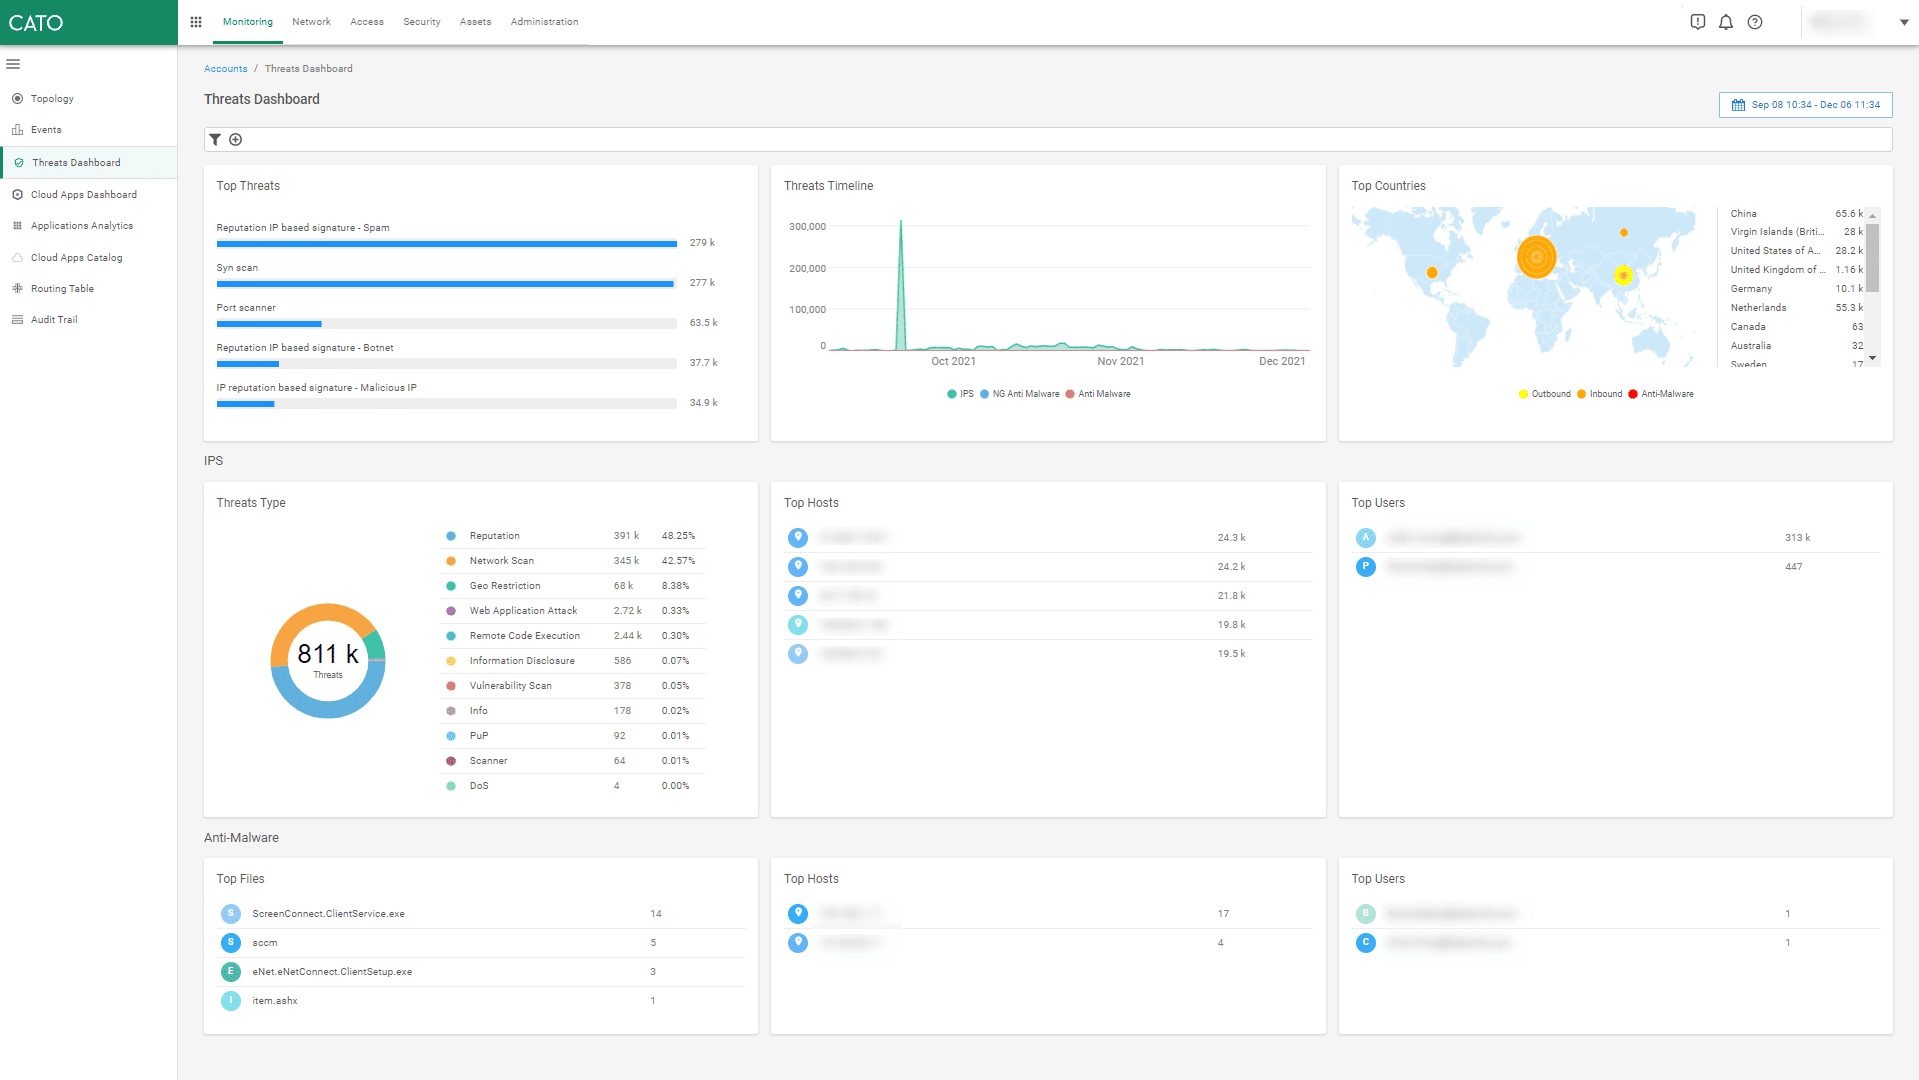 The new Threat Dashboard